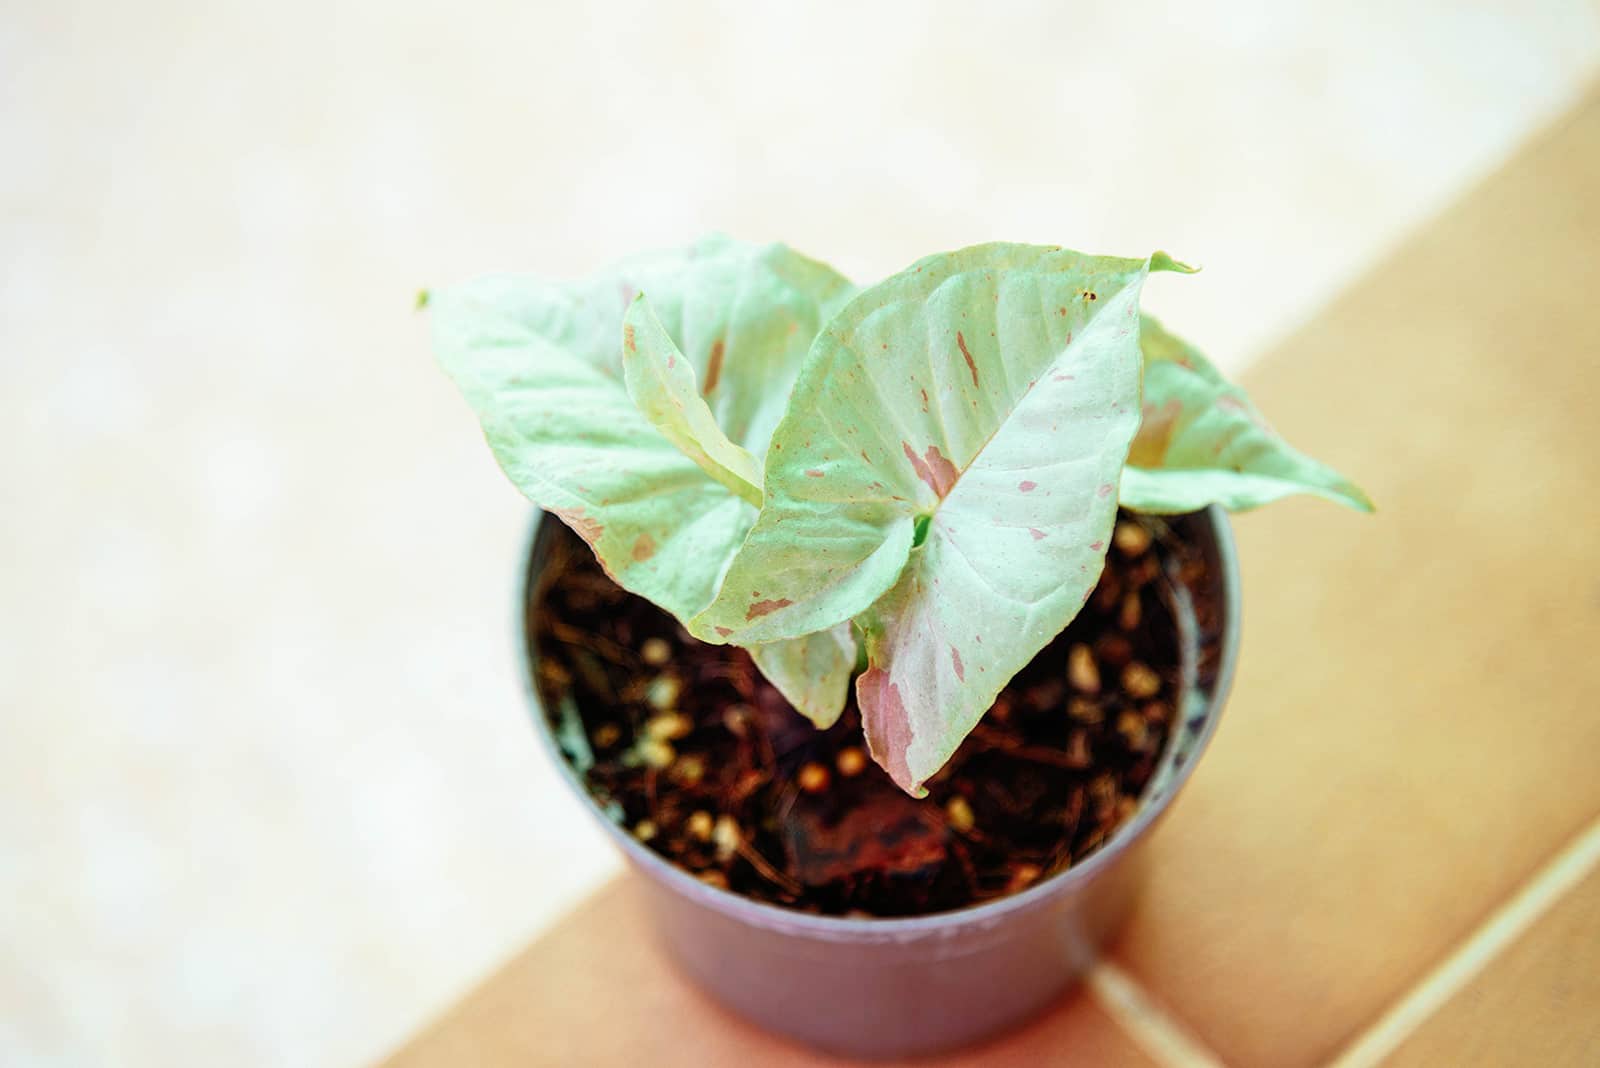 Syngonium 'Confetti' arrowhead plant in a small pot sitting on a tiled surface